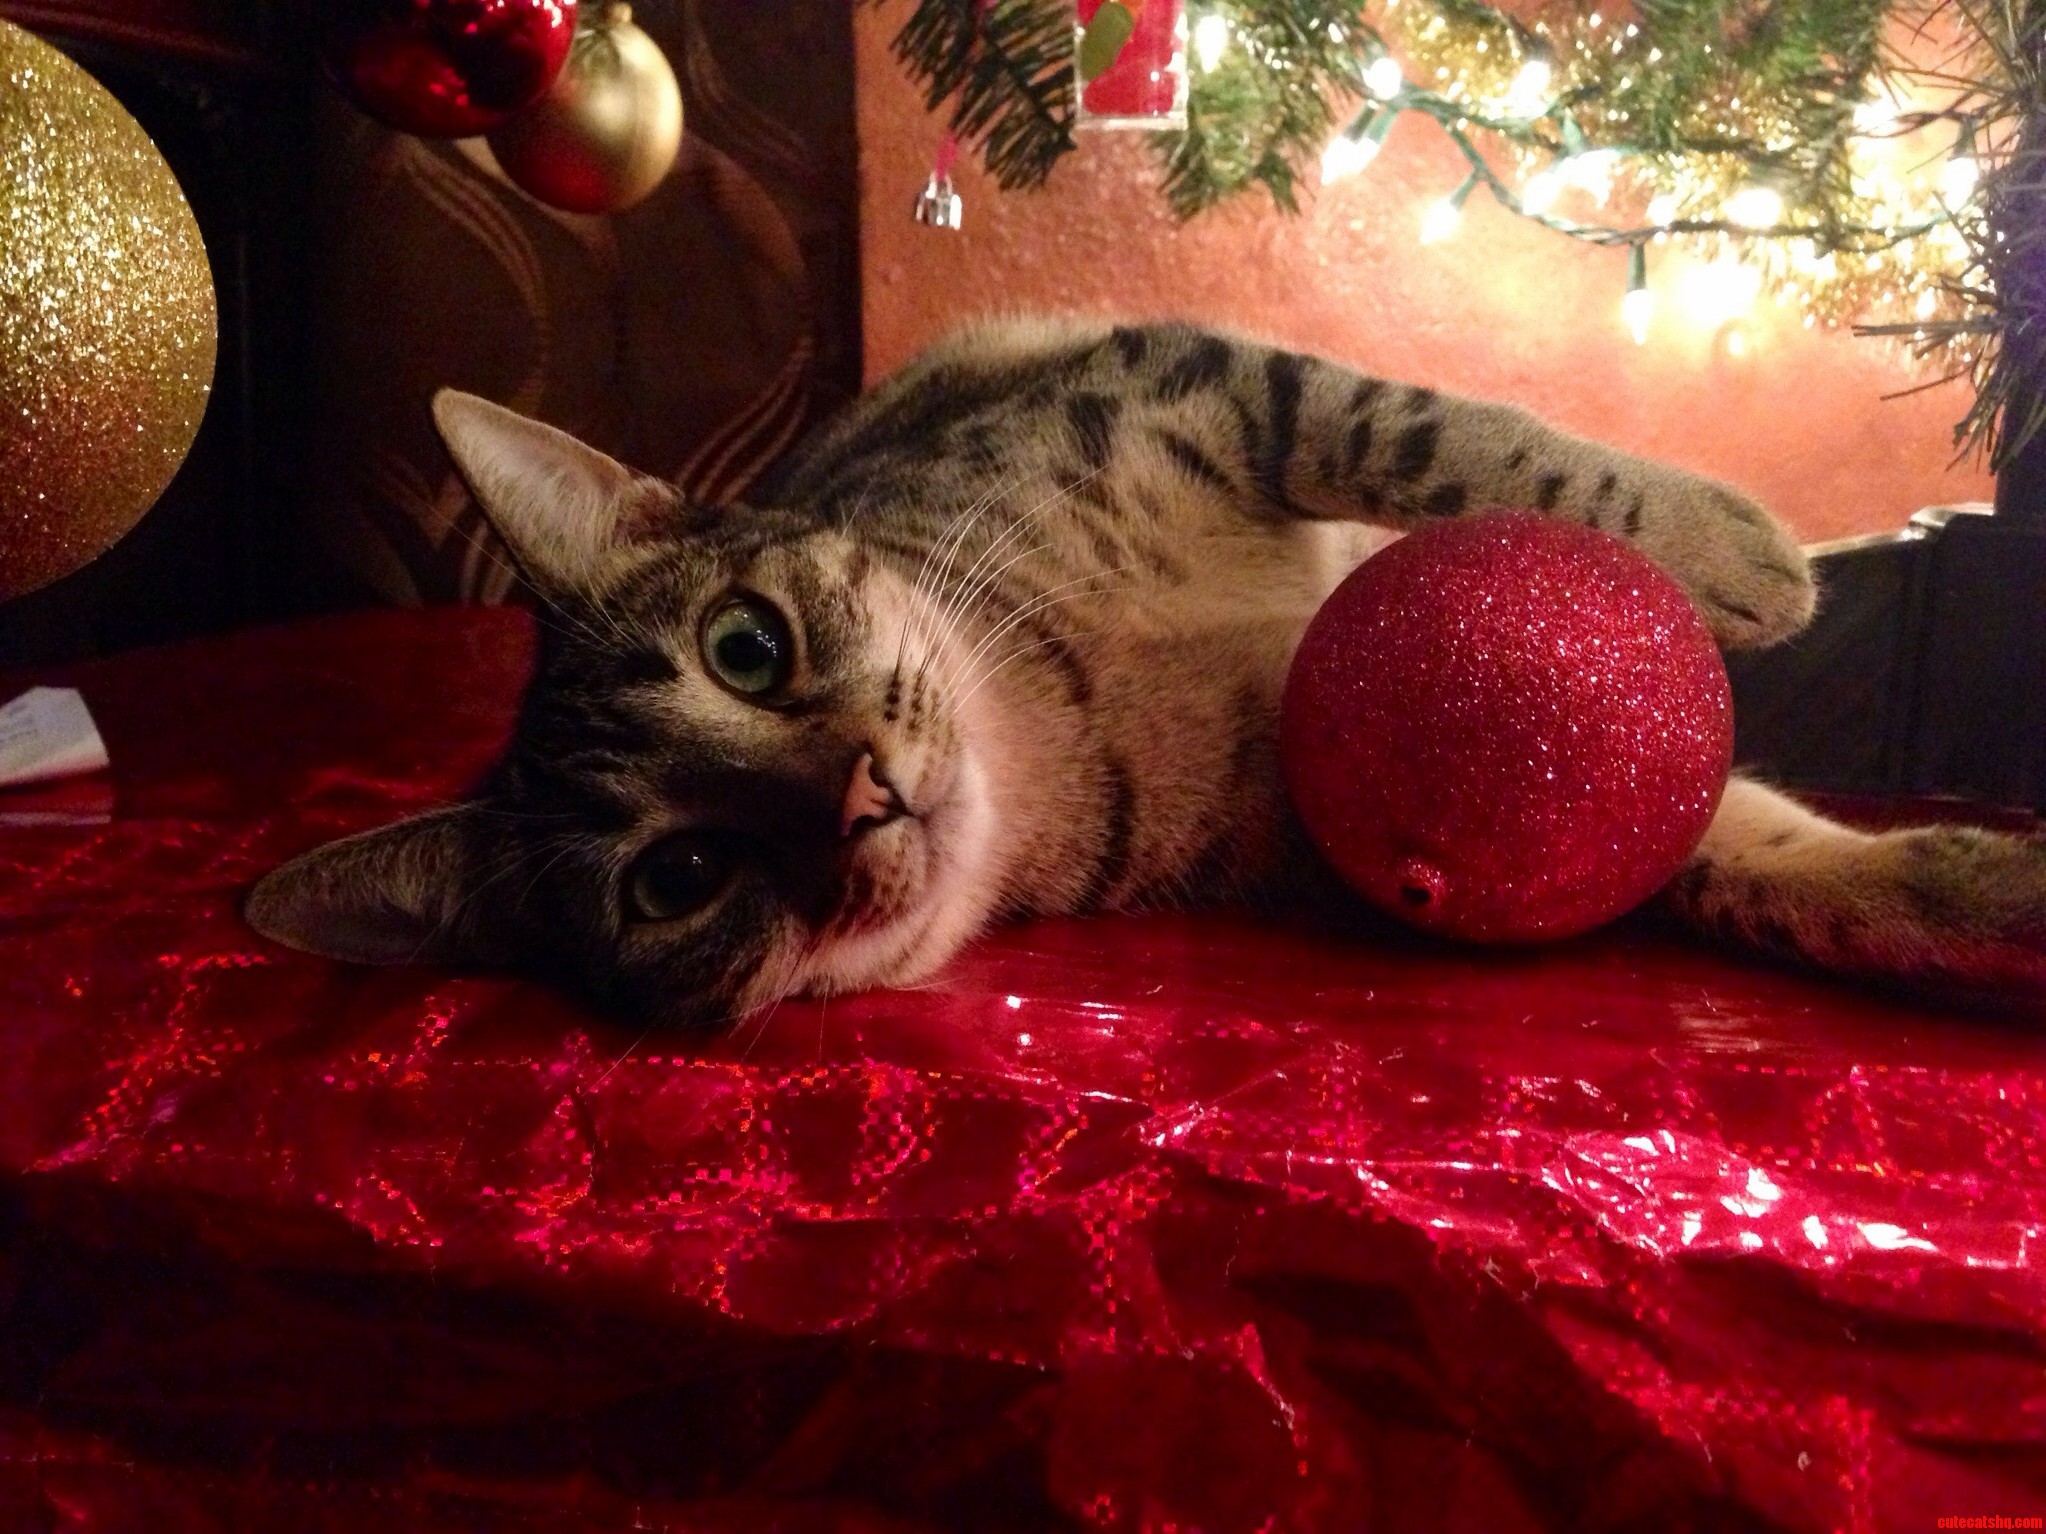 She Likes Laying Under The Tree